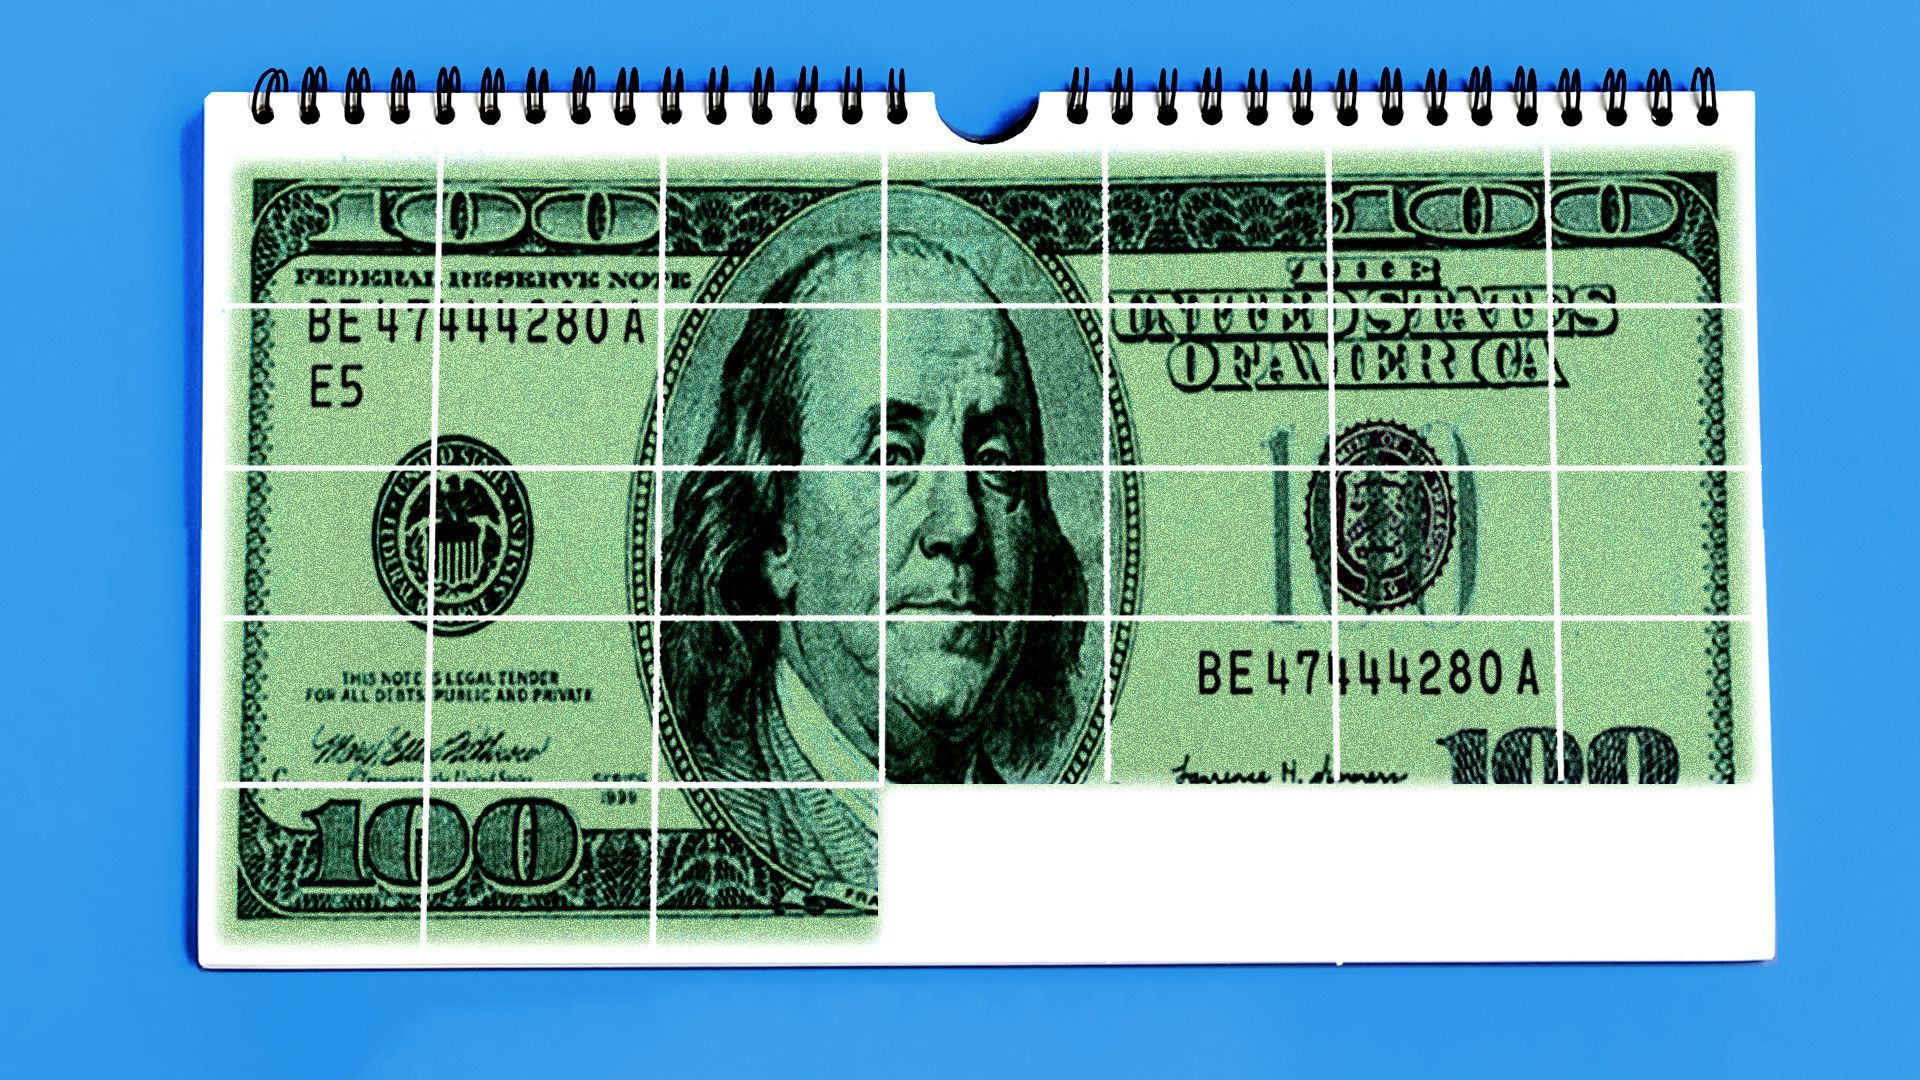 Illustration of a one hundred dollar bill on a monthly calendar